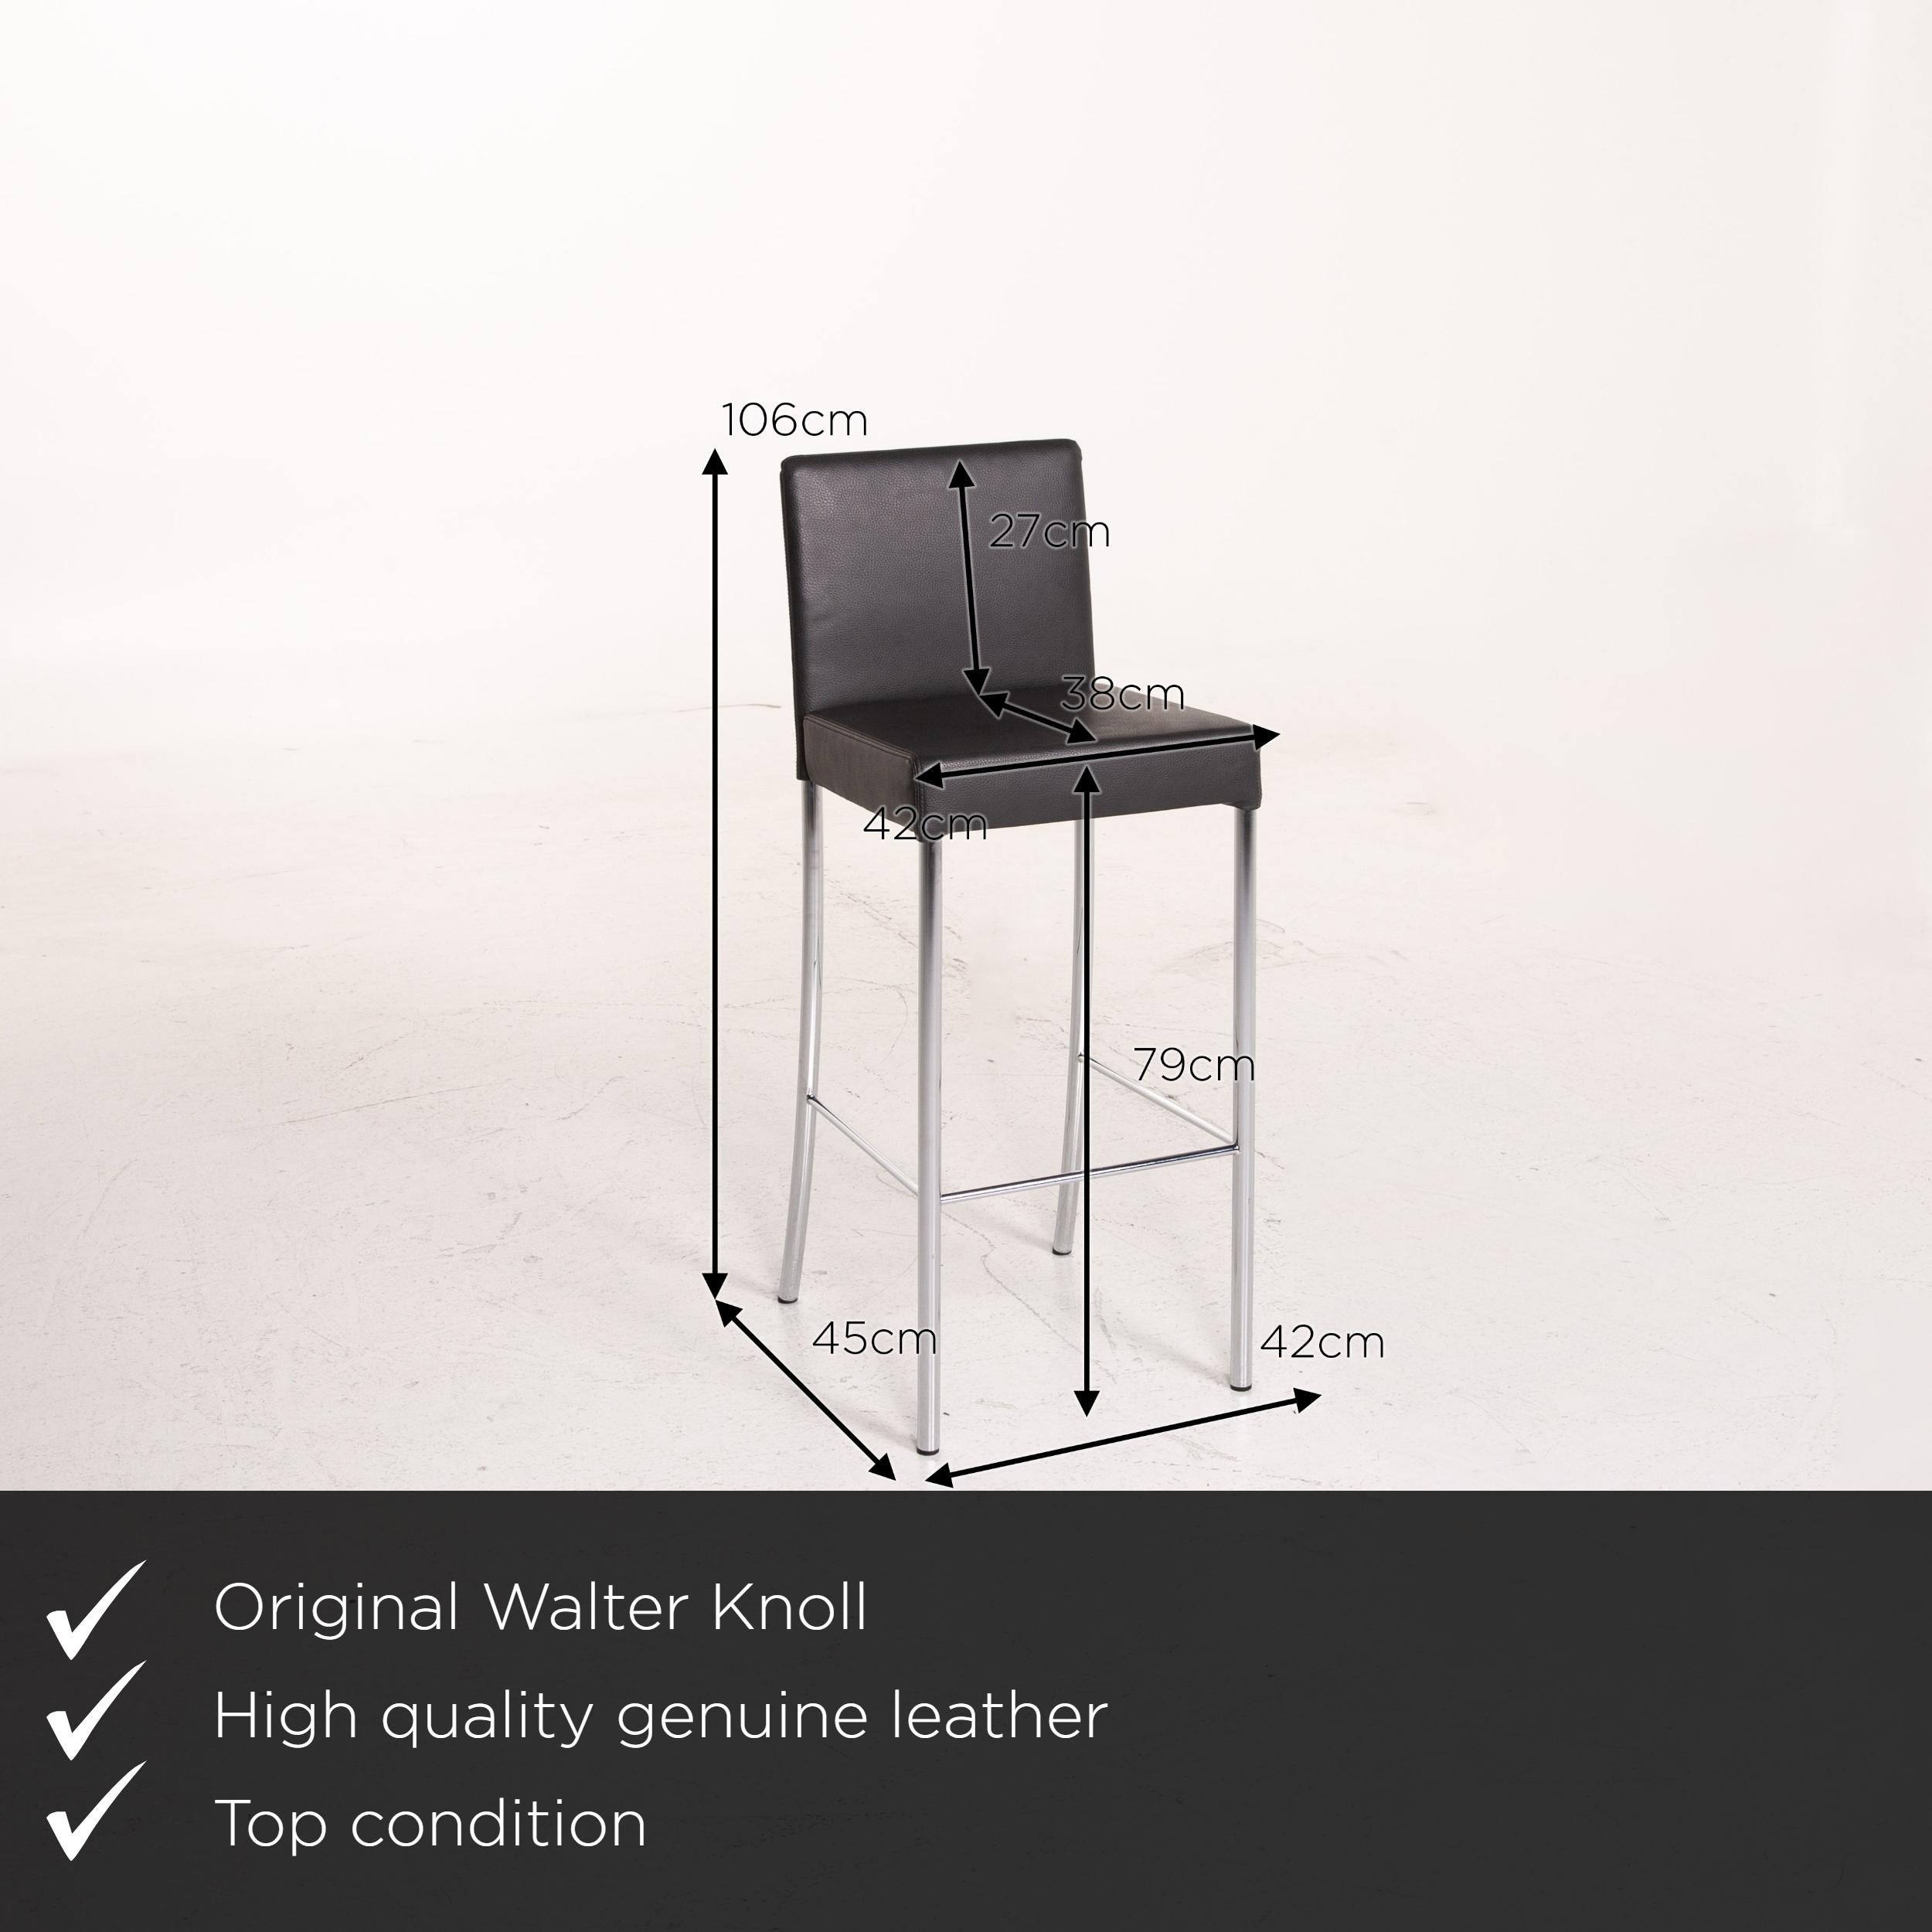 We present to you a Walter Knoll leather bar stool anthracite gray chair.
 
 

 Product measurements in centimetres:
 

 depth: 45
 width: 42
 height: 106
 seat height: 79
 rest height: 
 seat depth: 38
 seat width: 42
 back height: 27.